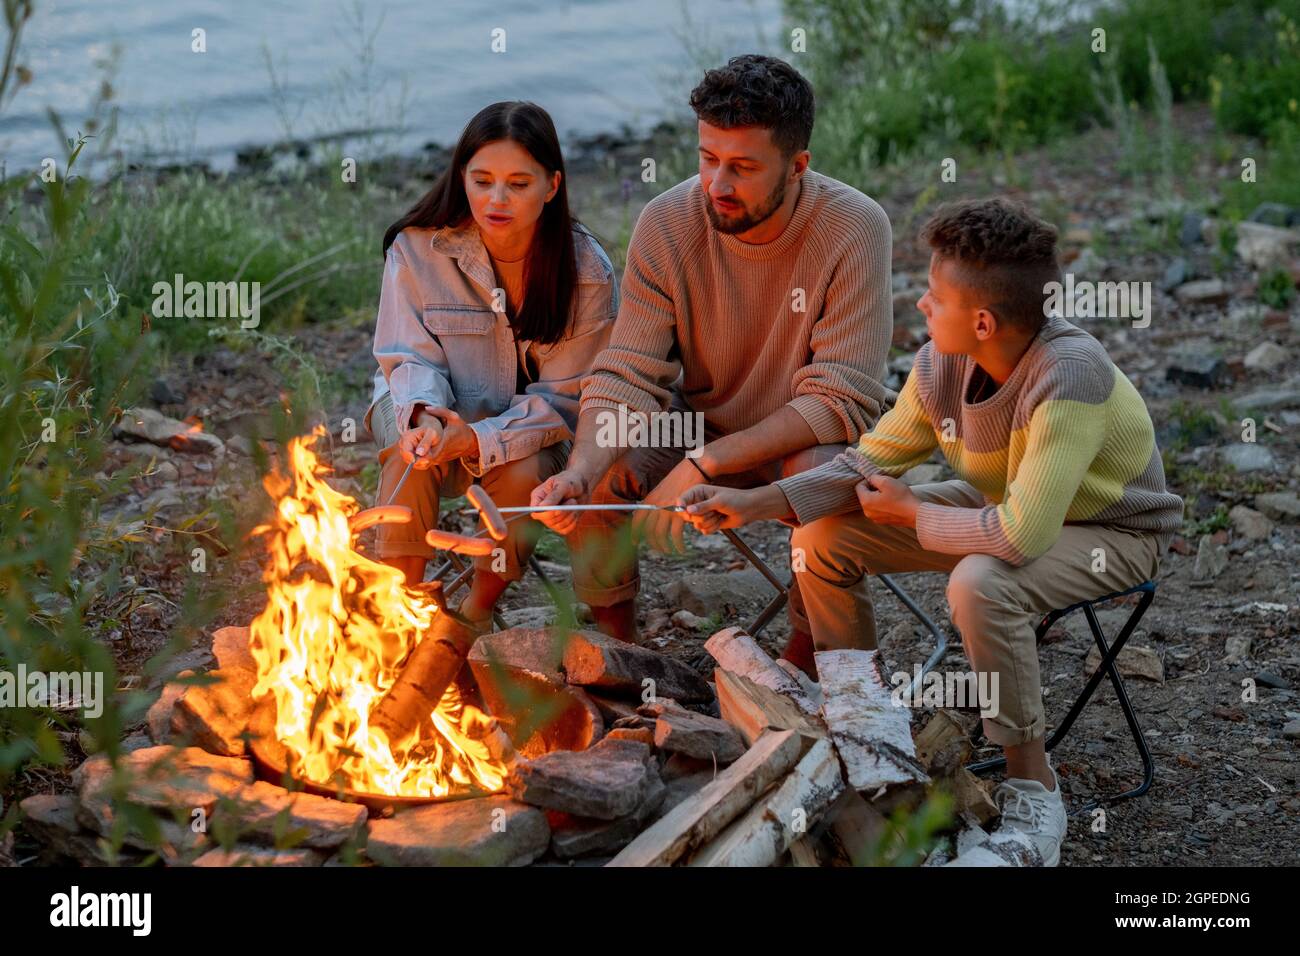 Three young backpackers frying sausages on campfire in the evening Stock Photo